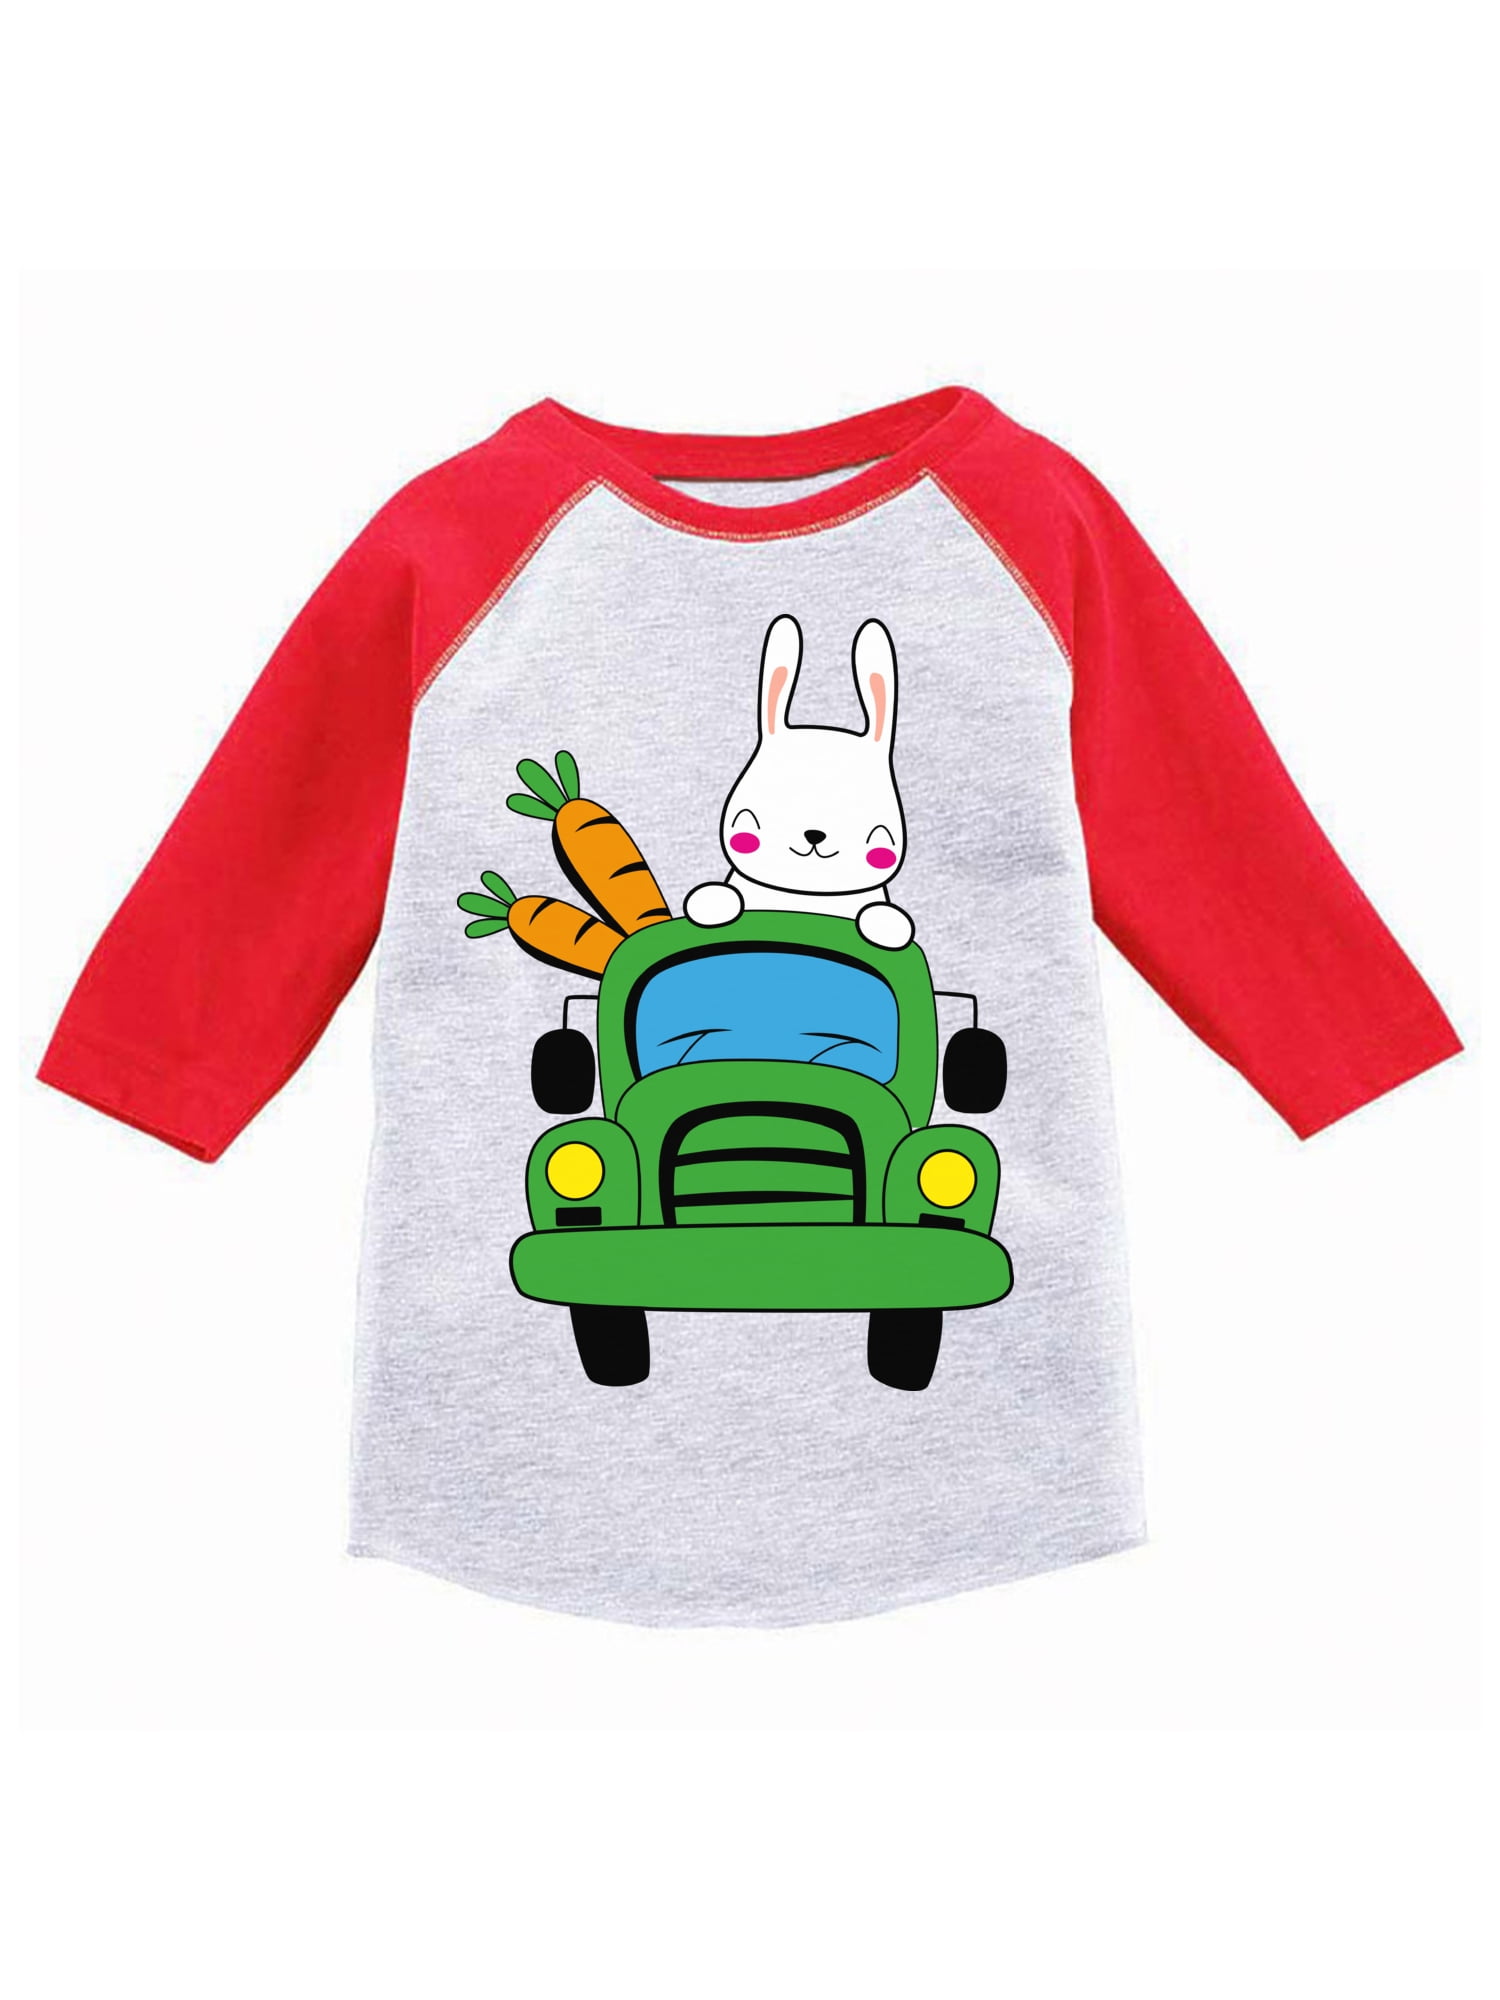 Easter Raglan T Shirt For Kids 4t 5t Boys Girls Bunny Toddler Outfits